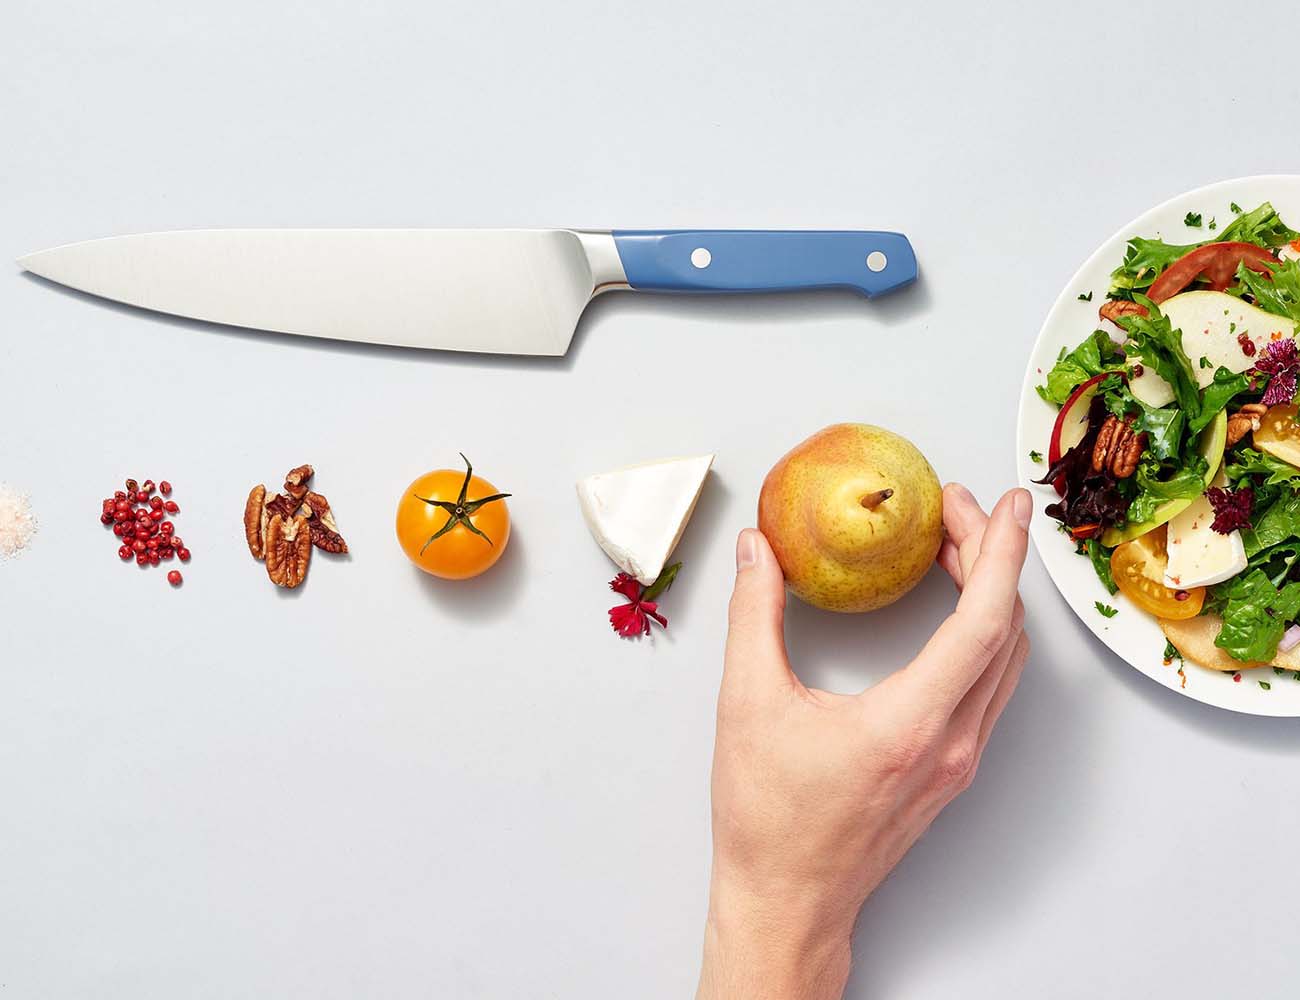 Misen – The Versatile and Affordable Kitchen Knife